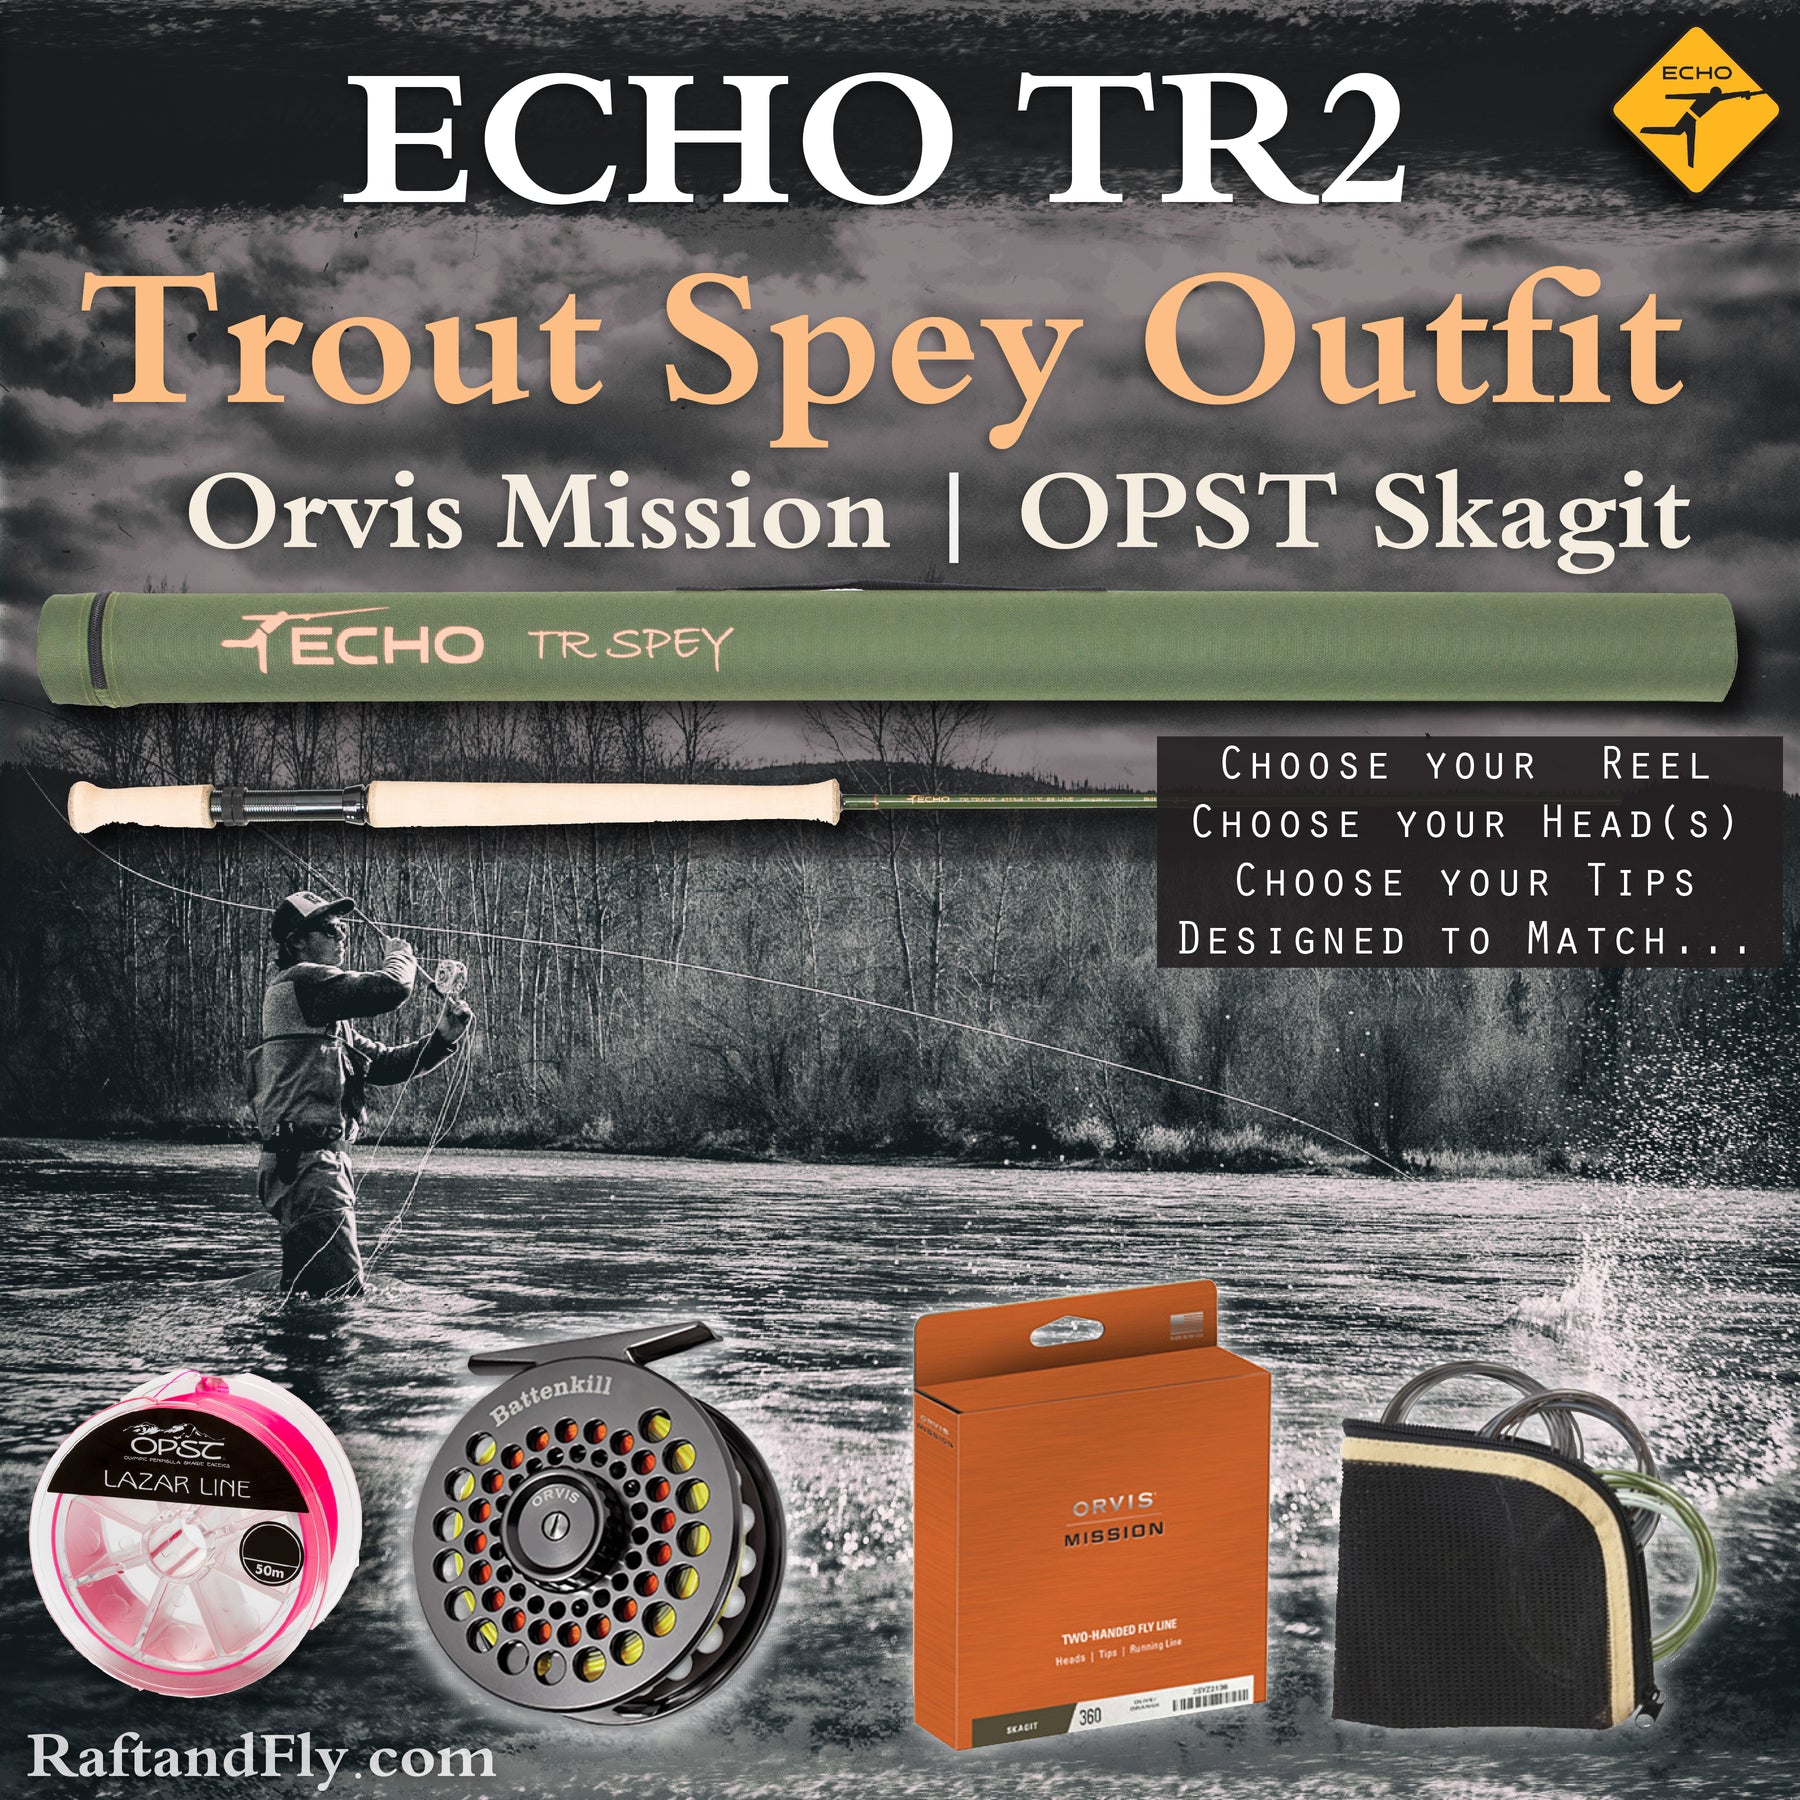 https://raftandfly.com/cdn/shop/products/Echo_TR2_Trout_Spey_Outfit_Orvis_Orvis-01_204995c3-694f-493b-89dc-9c92eee0d9ad_1800x1800.jpg?v=1630277308